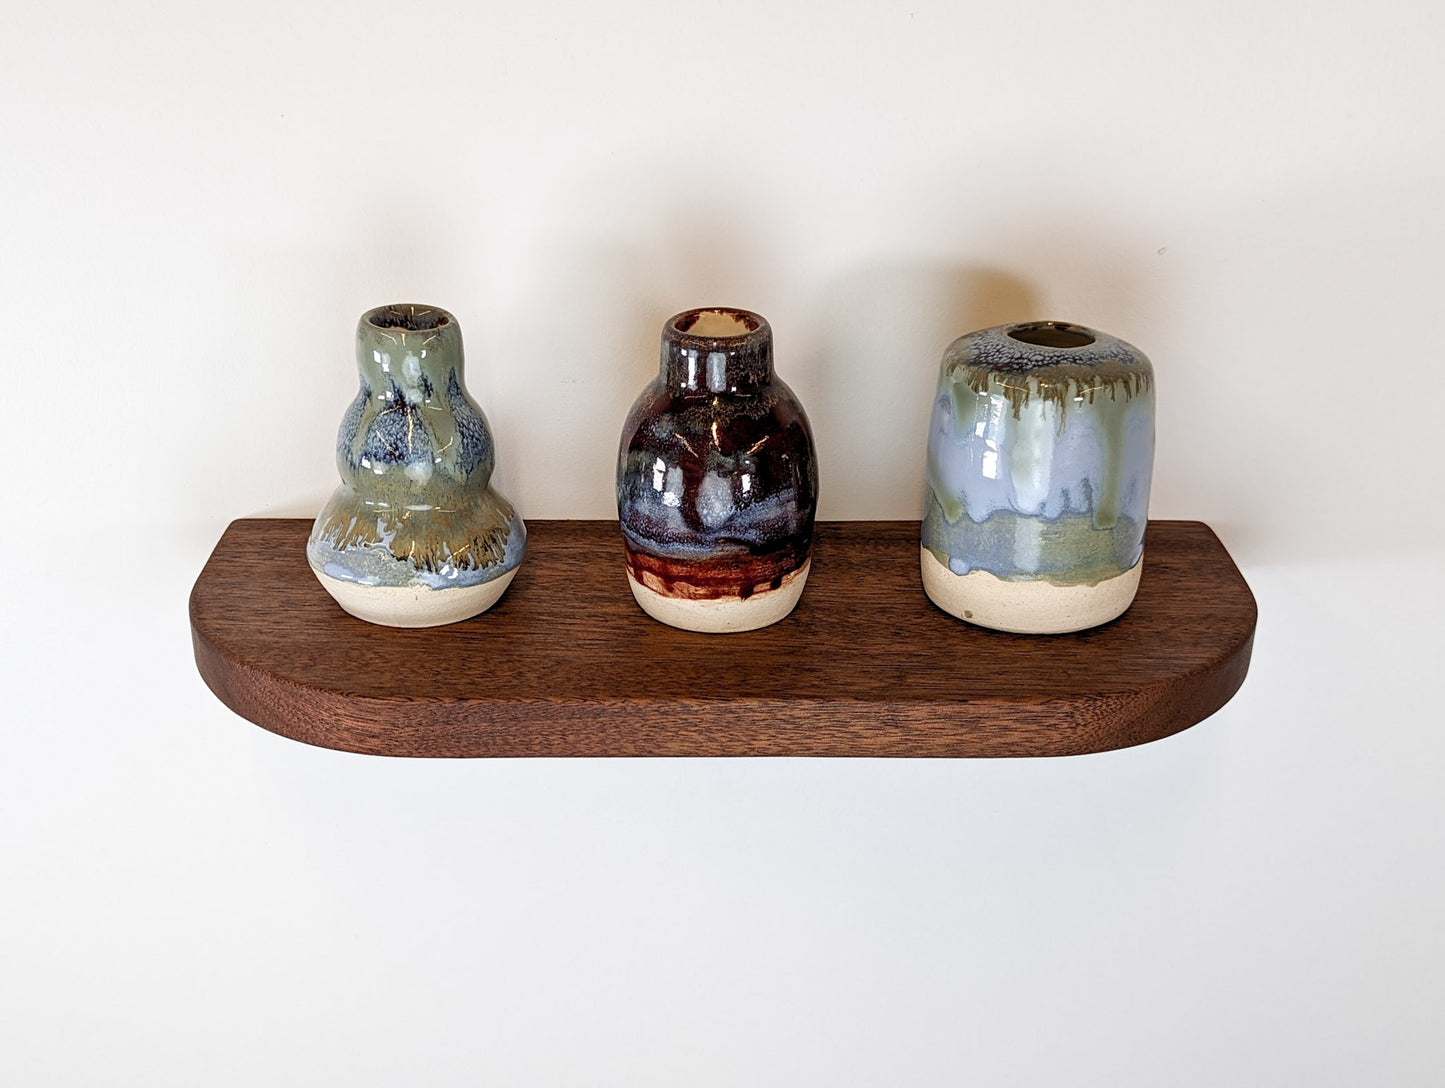 Top view of a mahogany floating shelf with three vases as decor